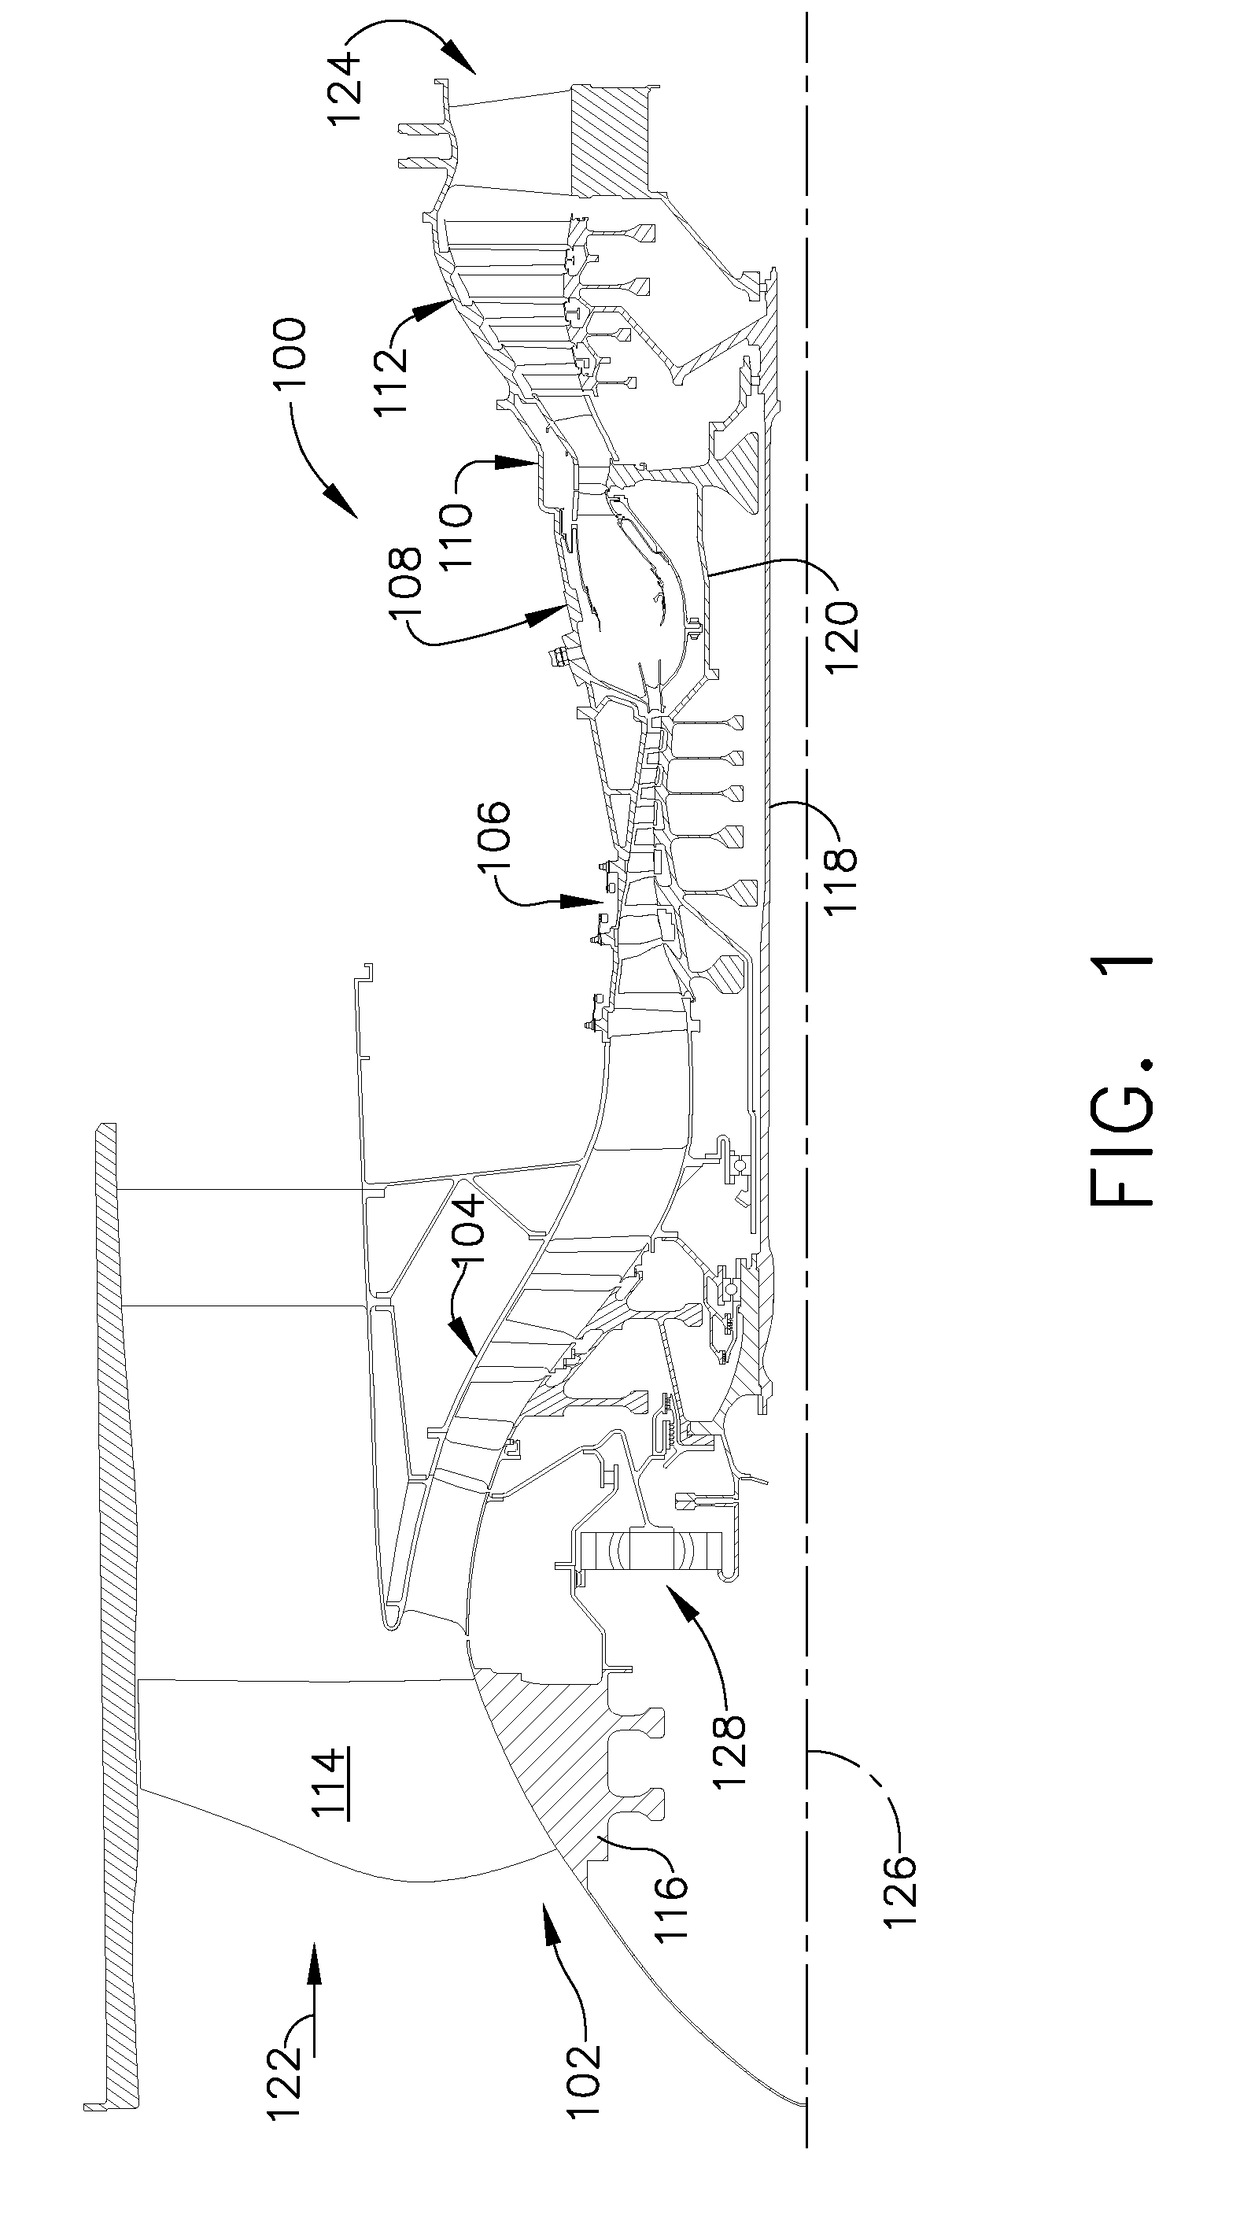 Windage shield system and method of suppressing resonant acoustic noise